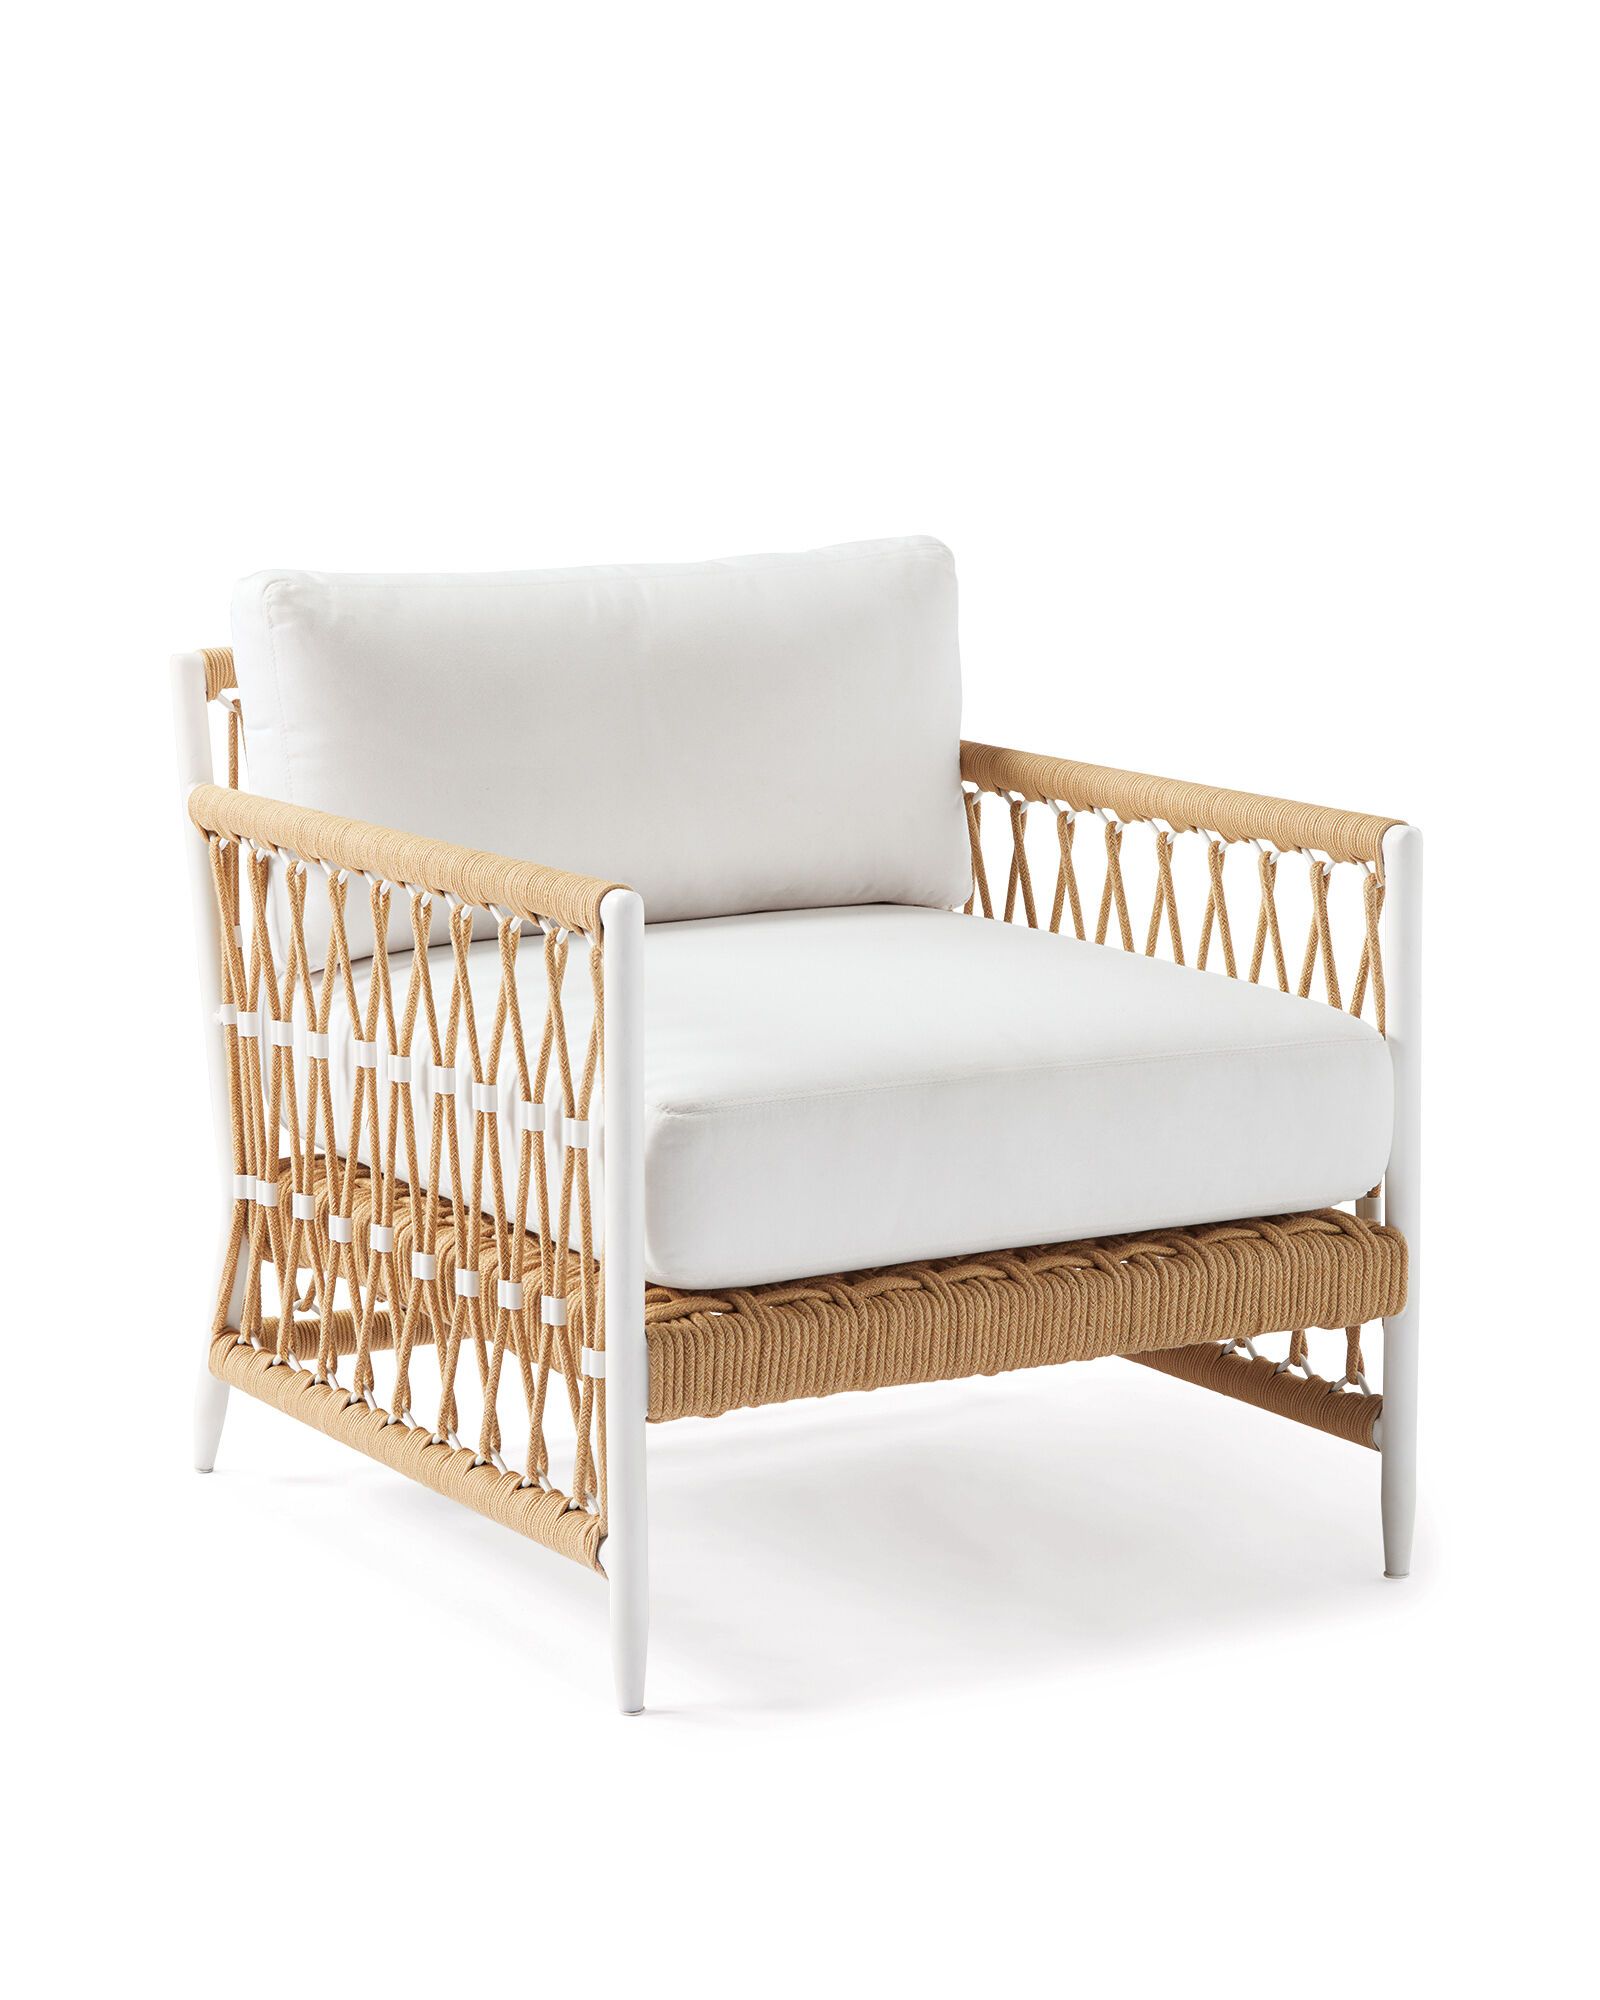 Salt Creek Lounge Chair | Serena and Lily